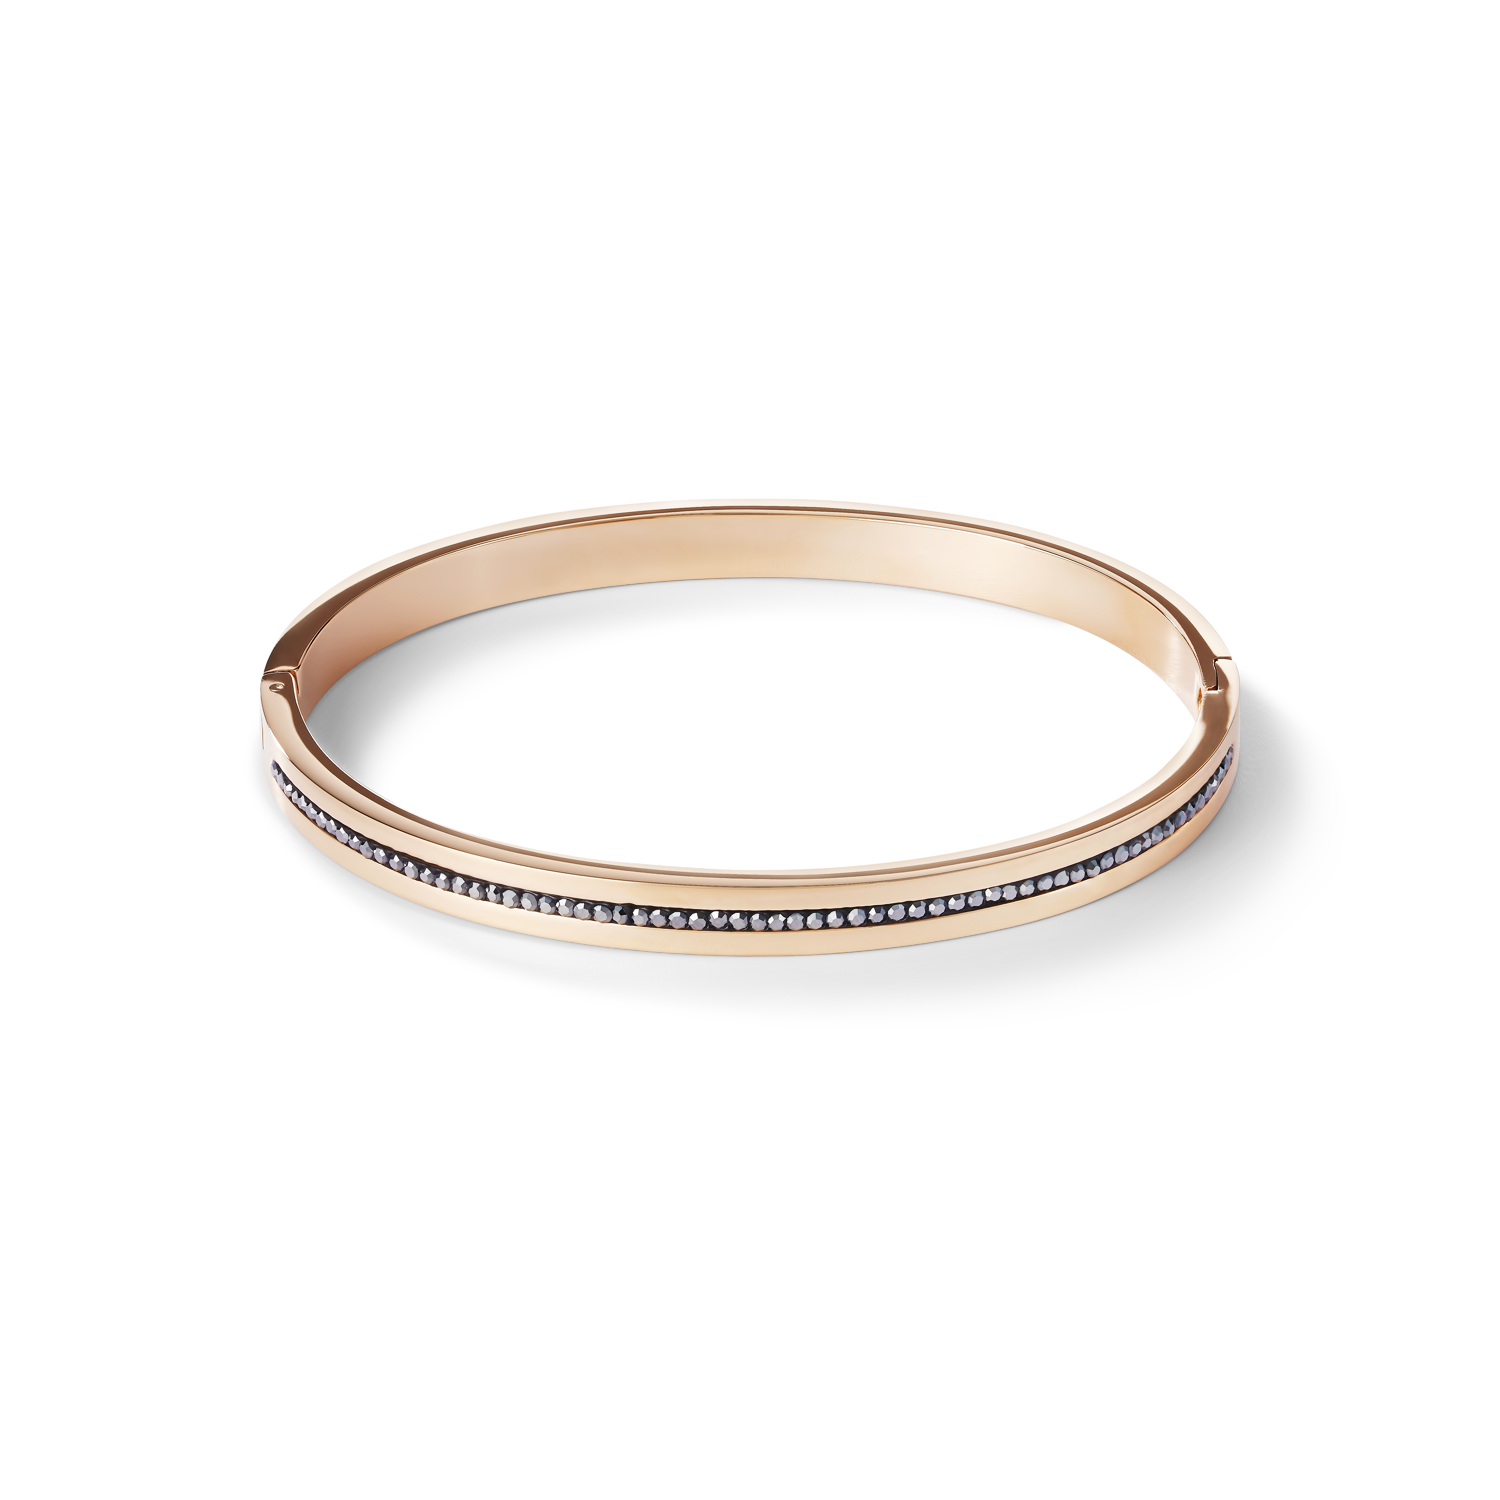 Bangle stainless steel rose gold & crystals pavé strip anthracite